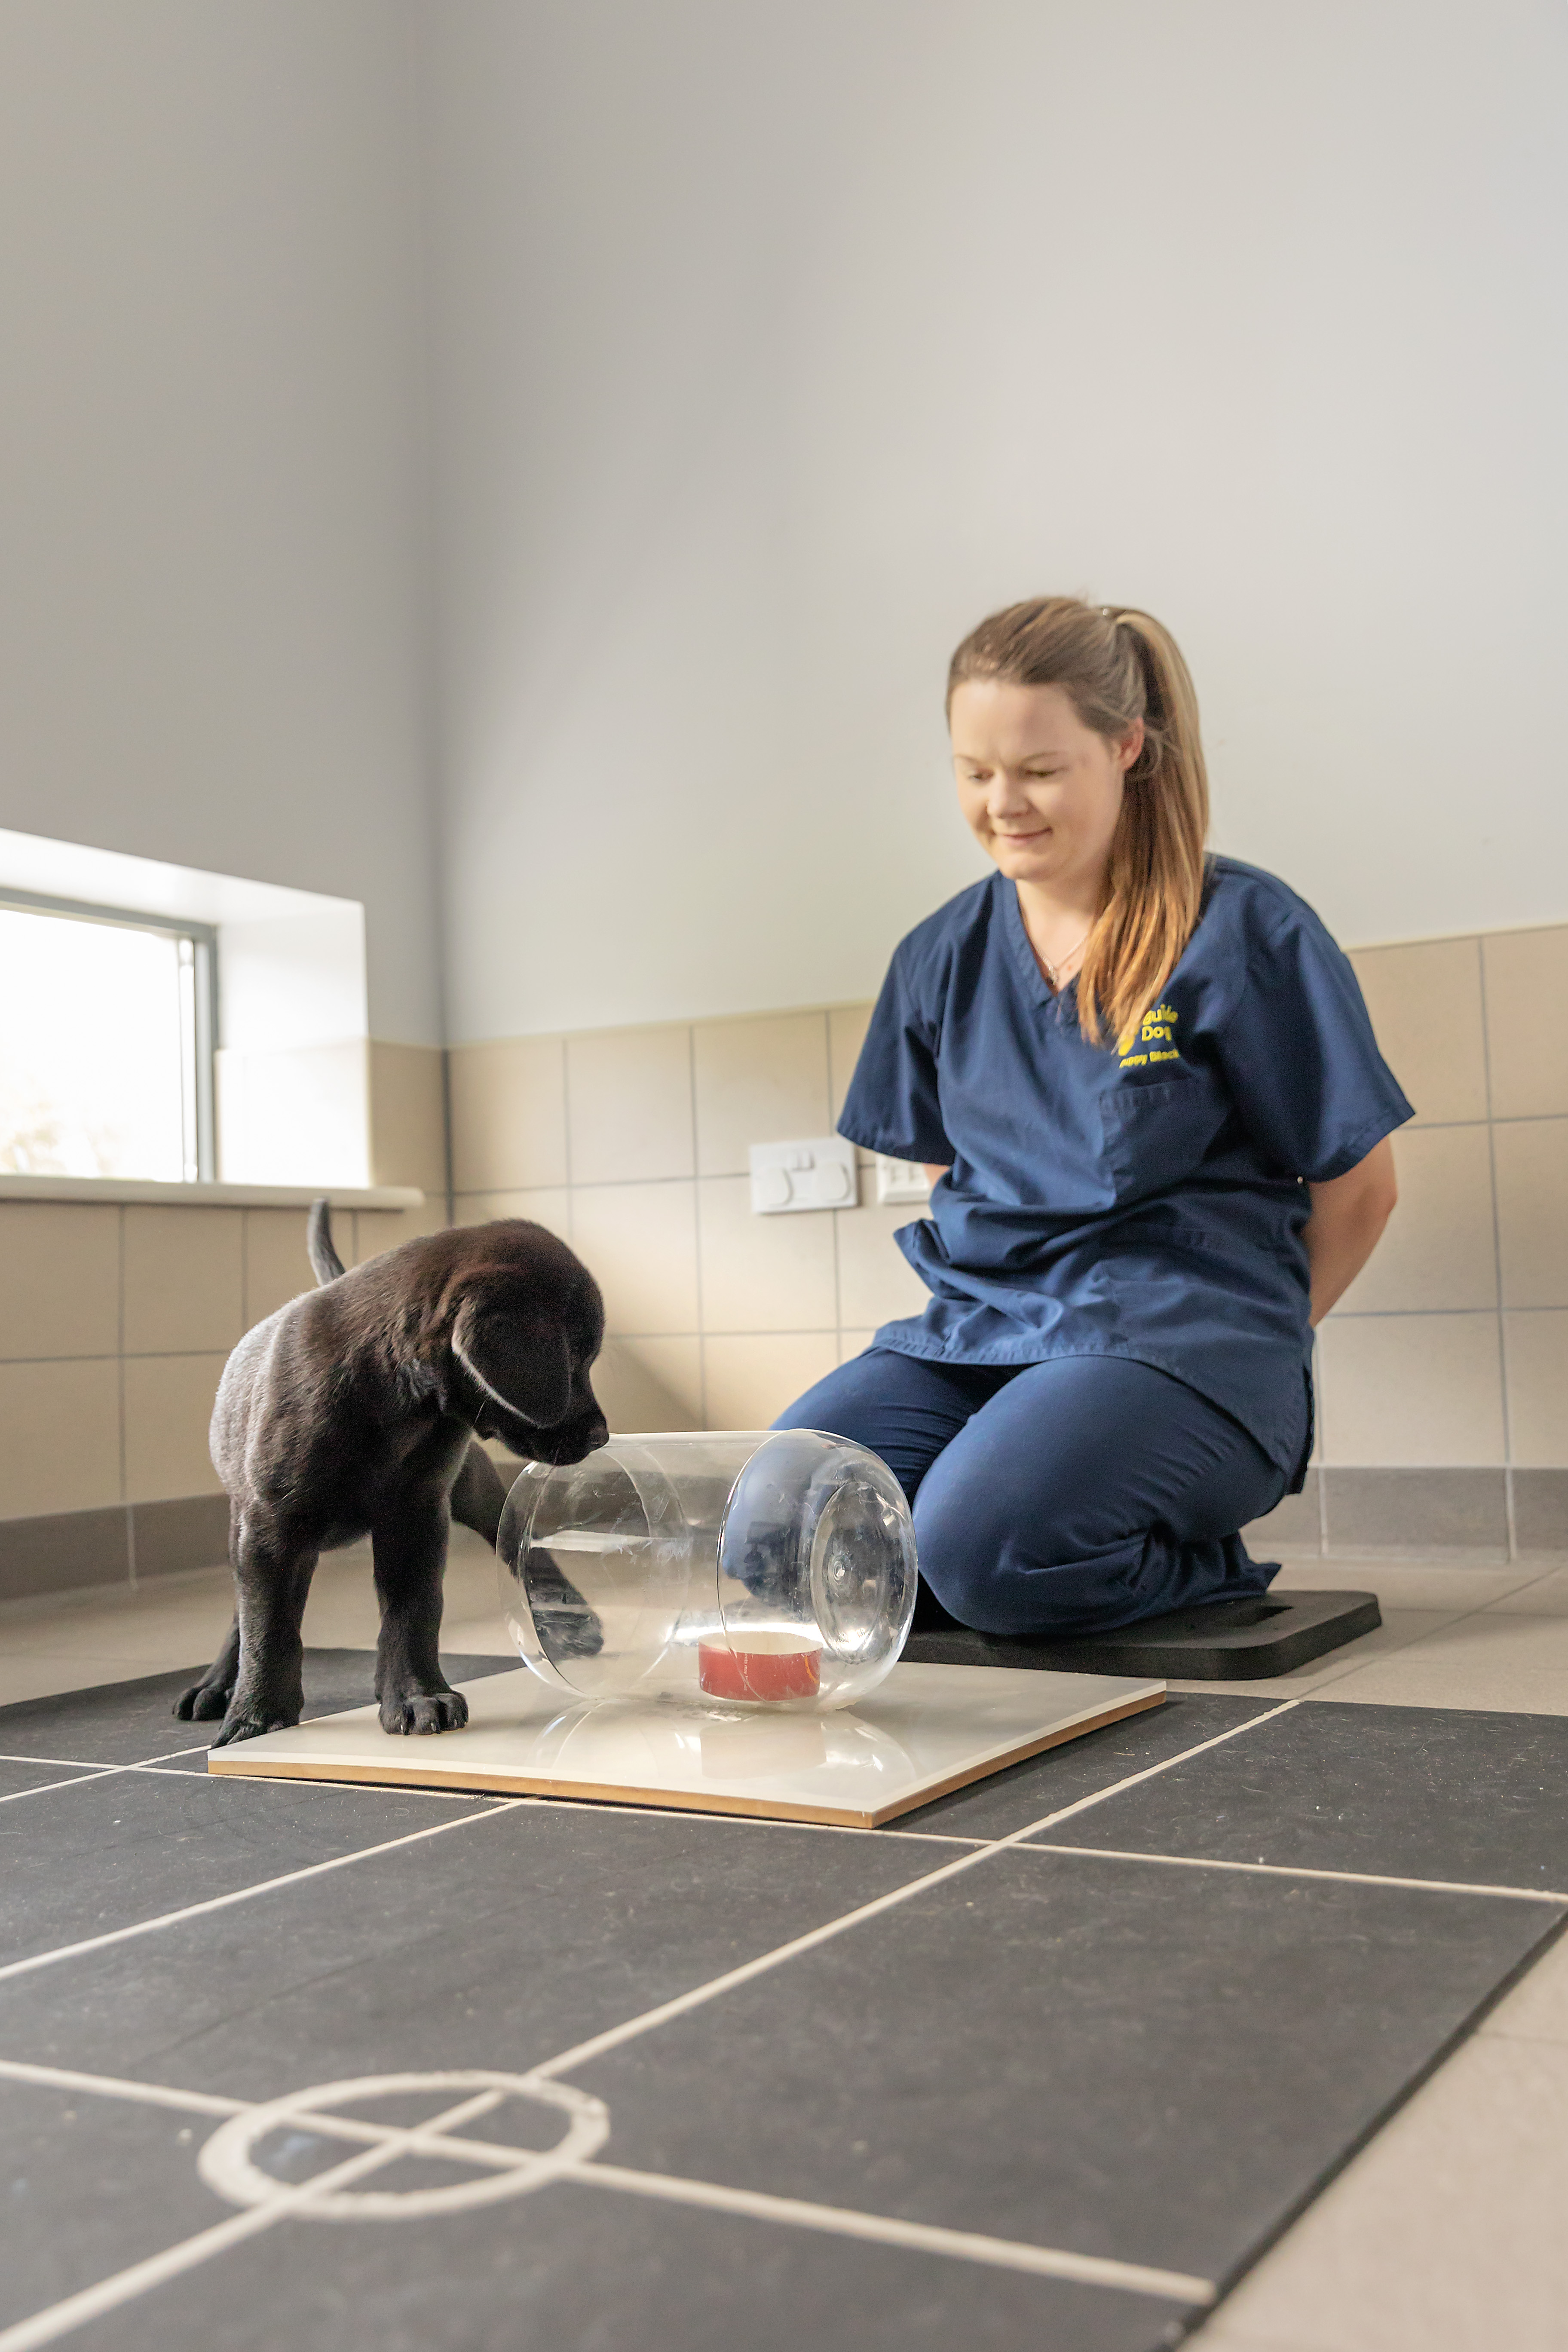 Becky Hunt kneels on the floor while a black labrador puppy takes part in a puppy cognition puzzle. The puzzle consists of a red toy inside a clear plastic jar.